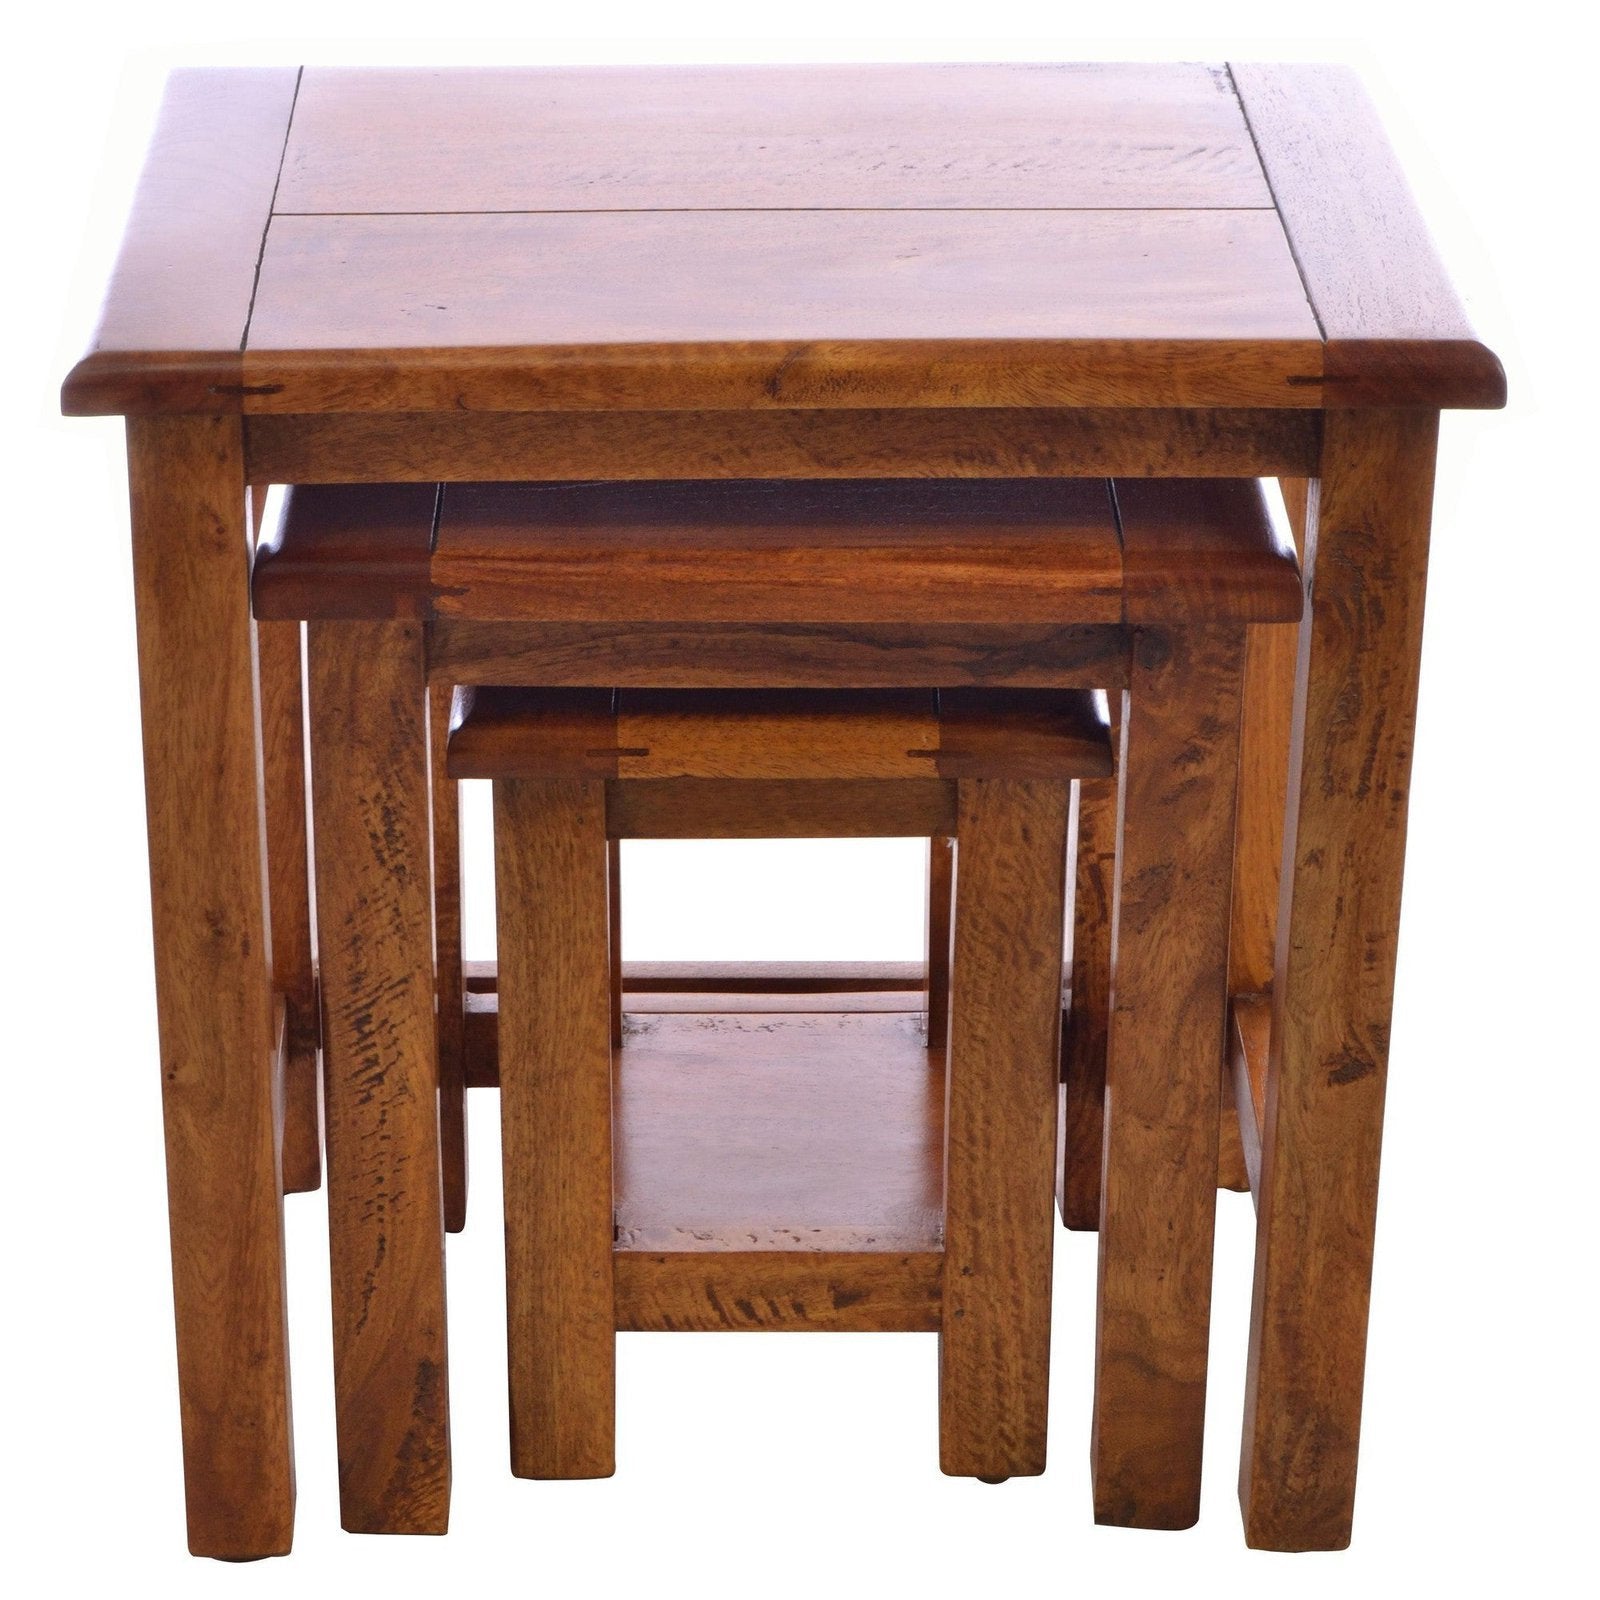 East Indies Nest of Tables